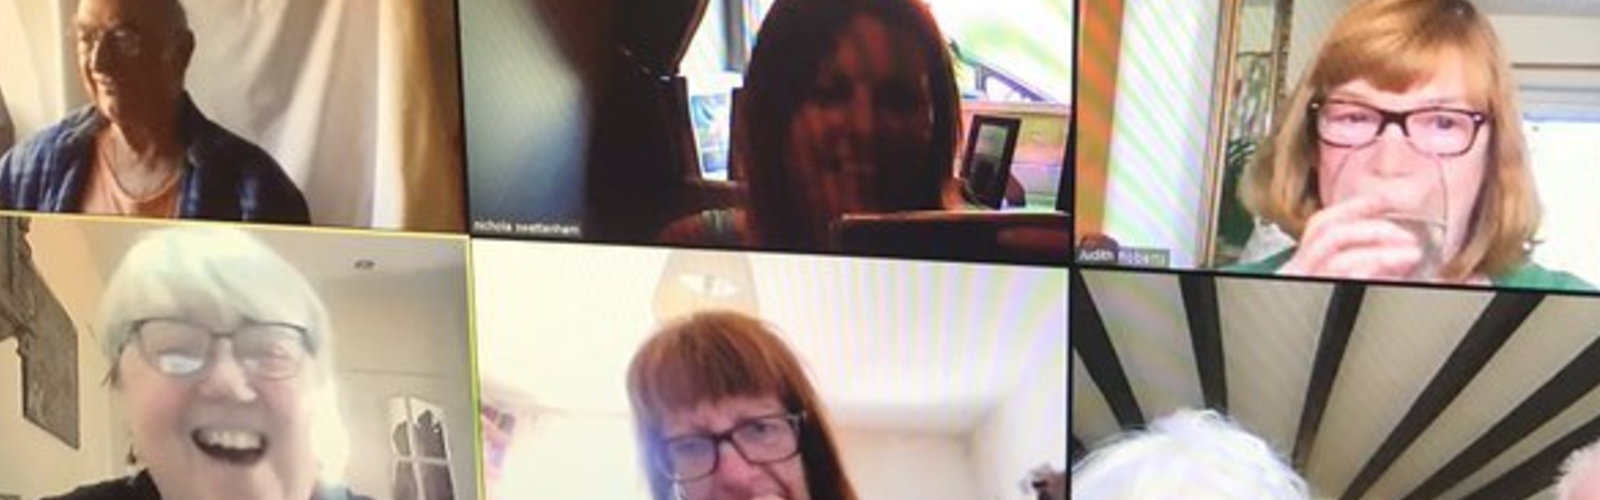 A group of older people speaking on a video call